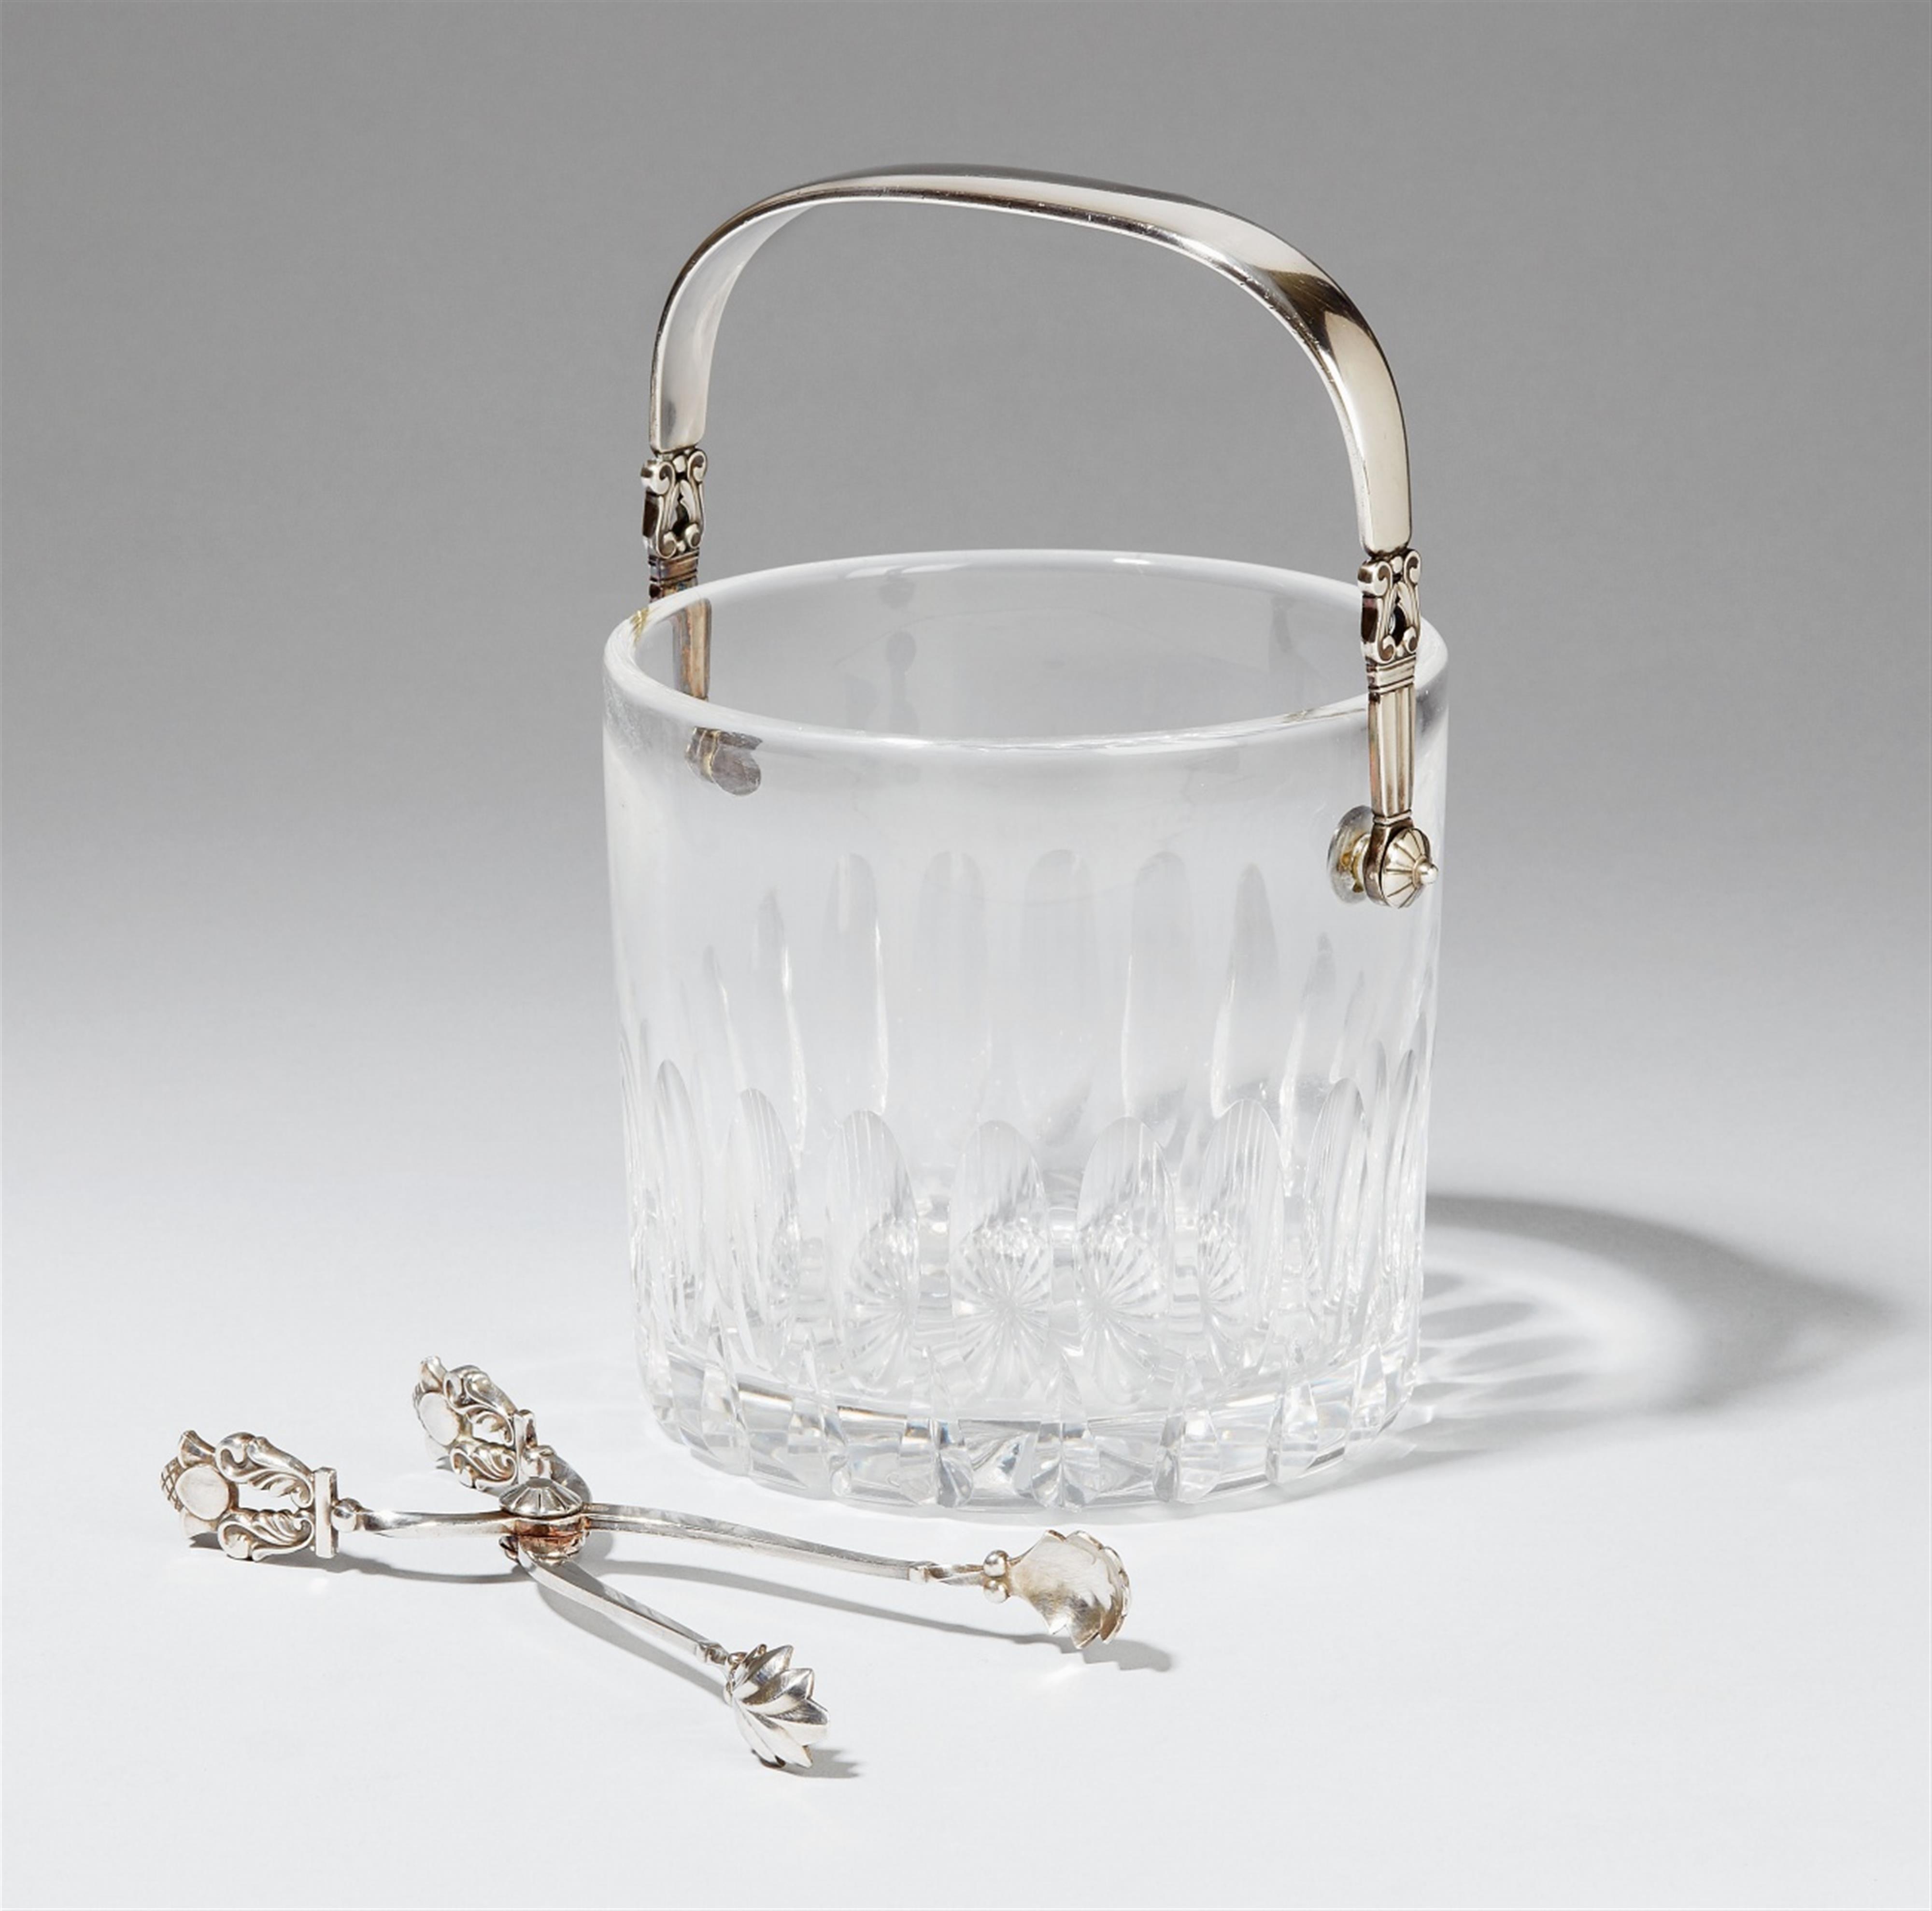 A Copenhagen silver ice bucket and tongs. Acorn/König model, with a glass inset. Marks of Georg Jensen, designed by Johan Rohde 1931, produced 1945 - 76. - image-1